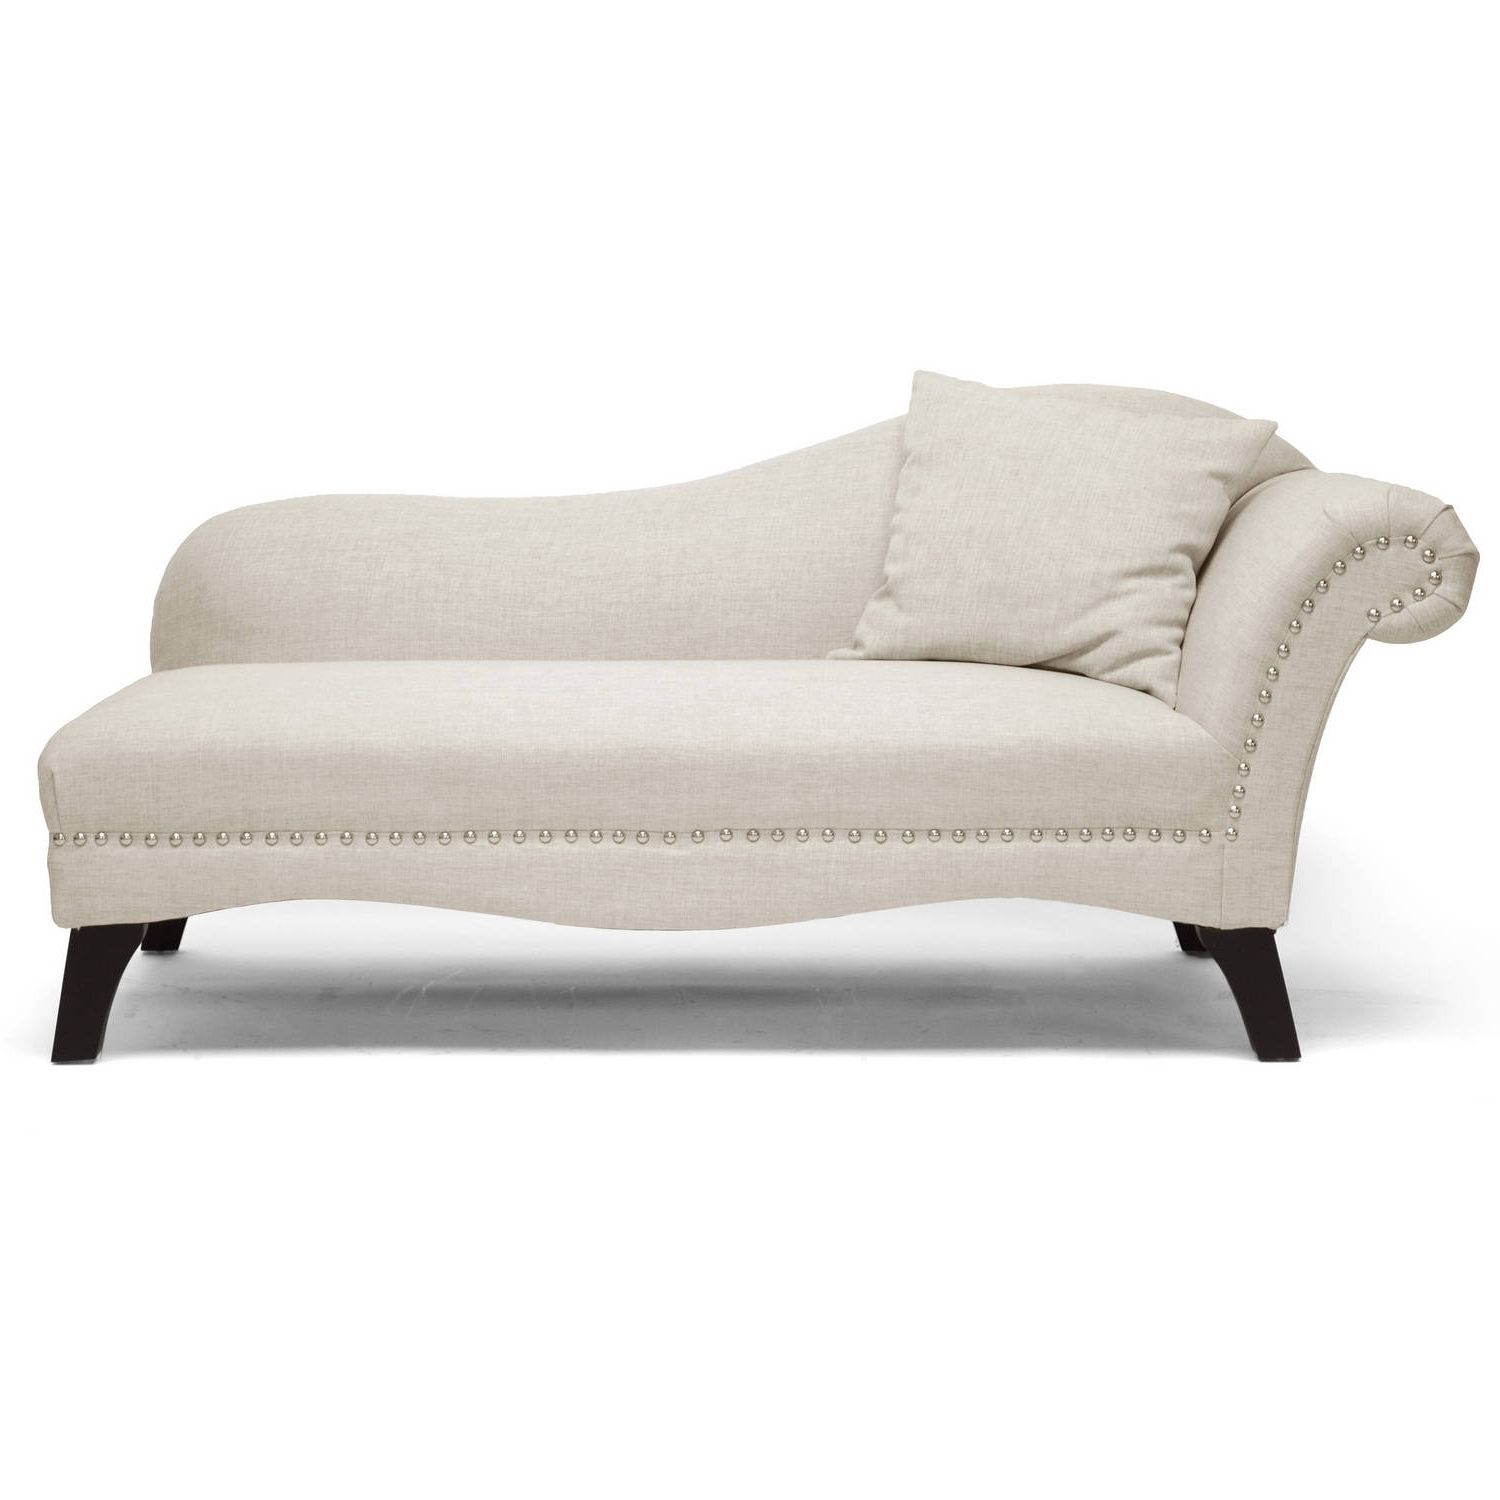 Chaise Lounges – Walmart With Current Tufted Chaise Lounges (View 15 of 15)